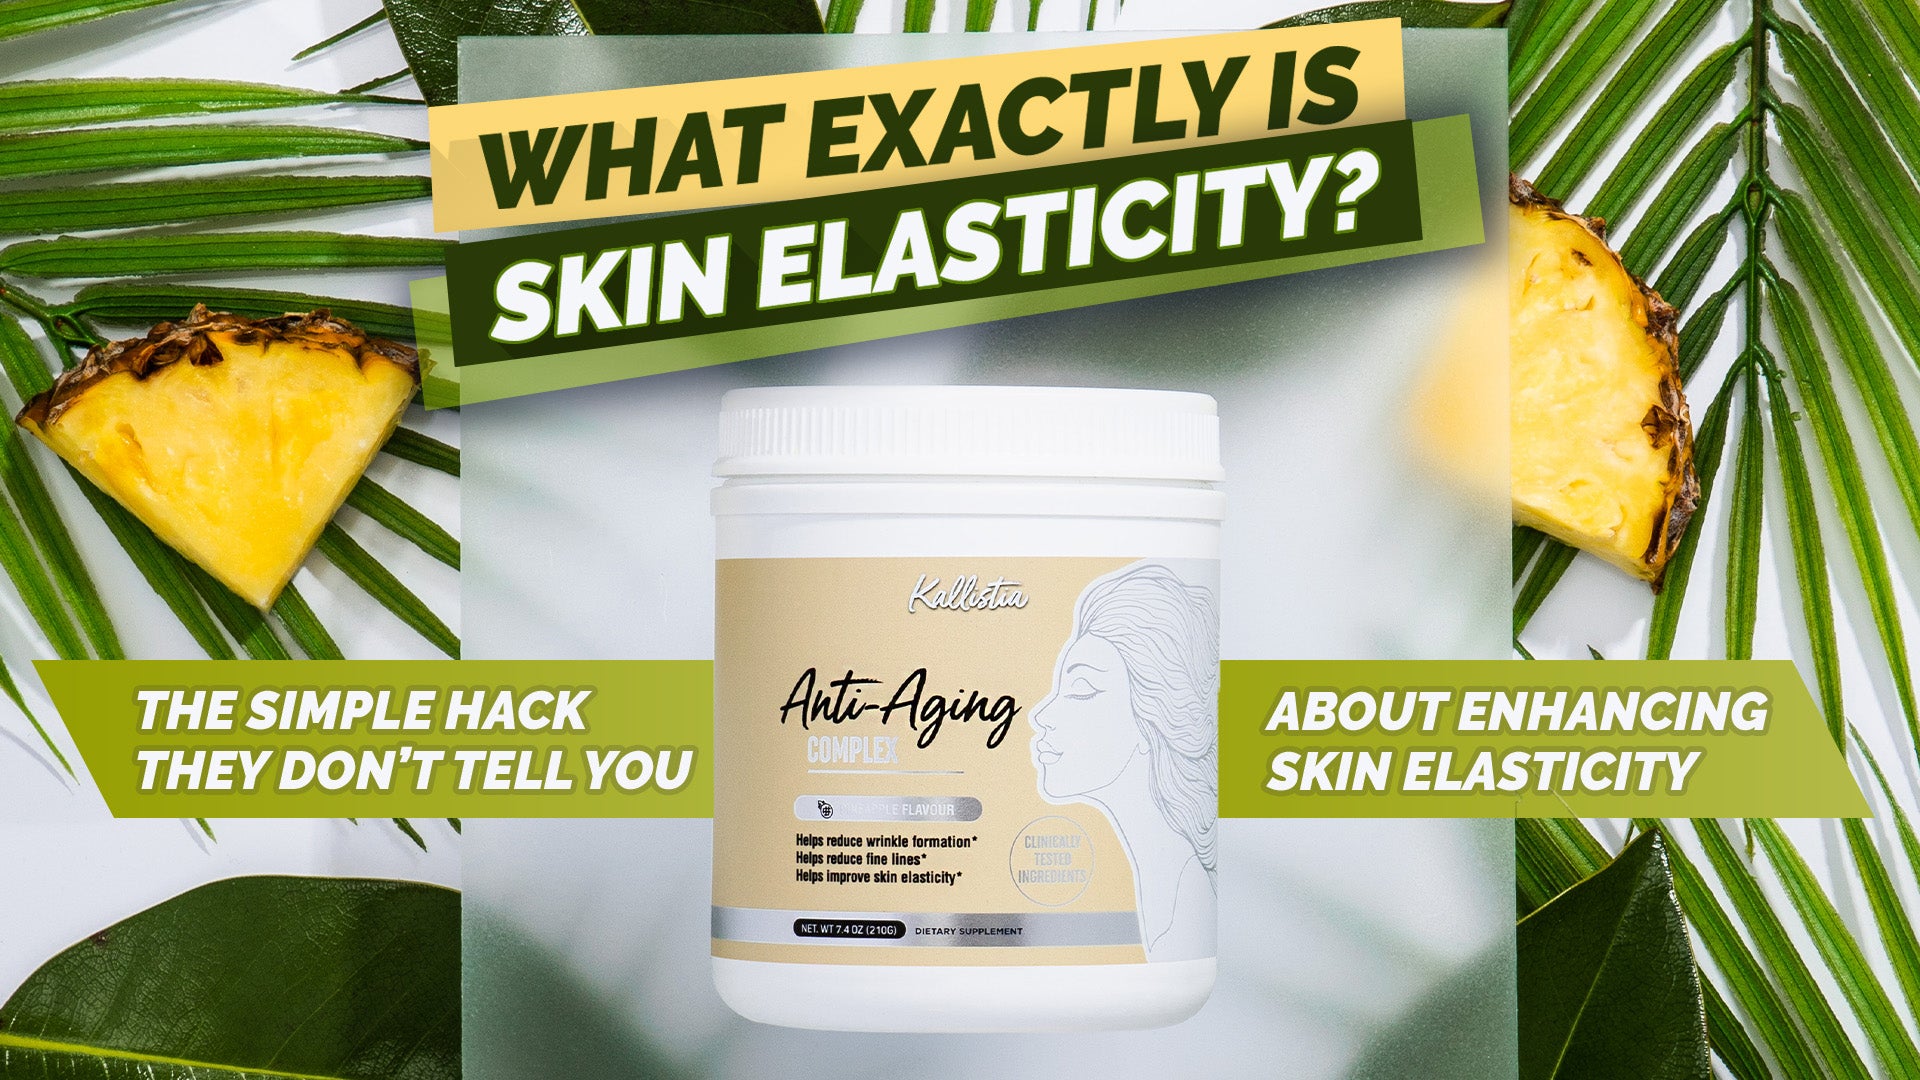 What exactly is Skin Elasticity?